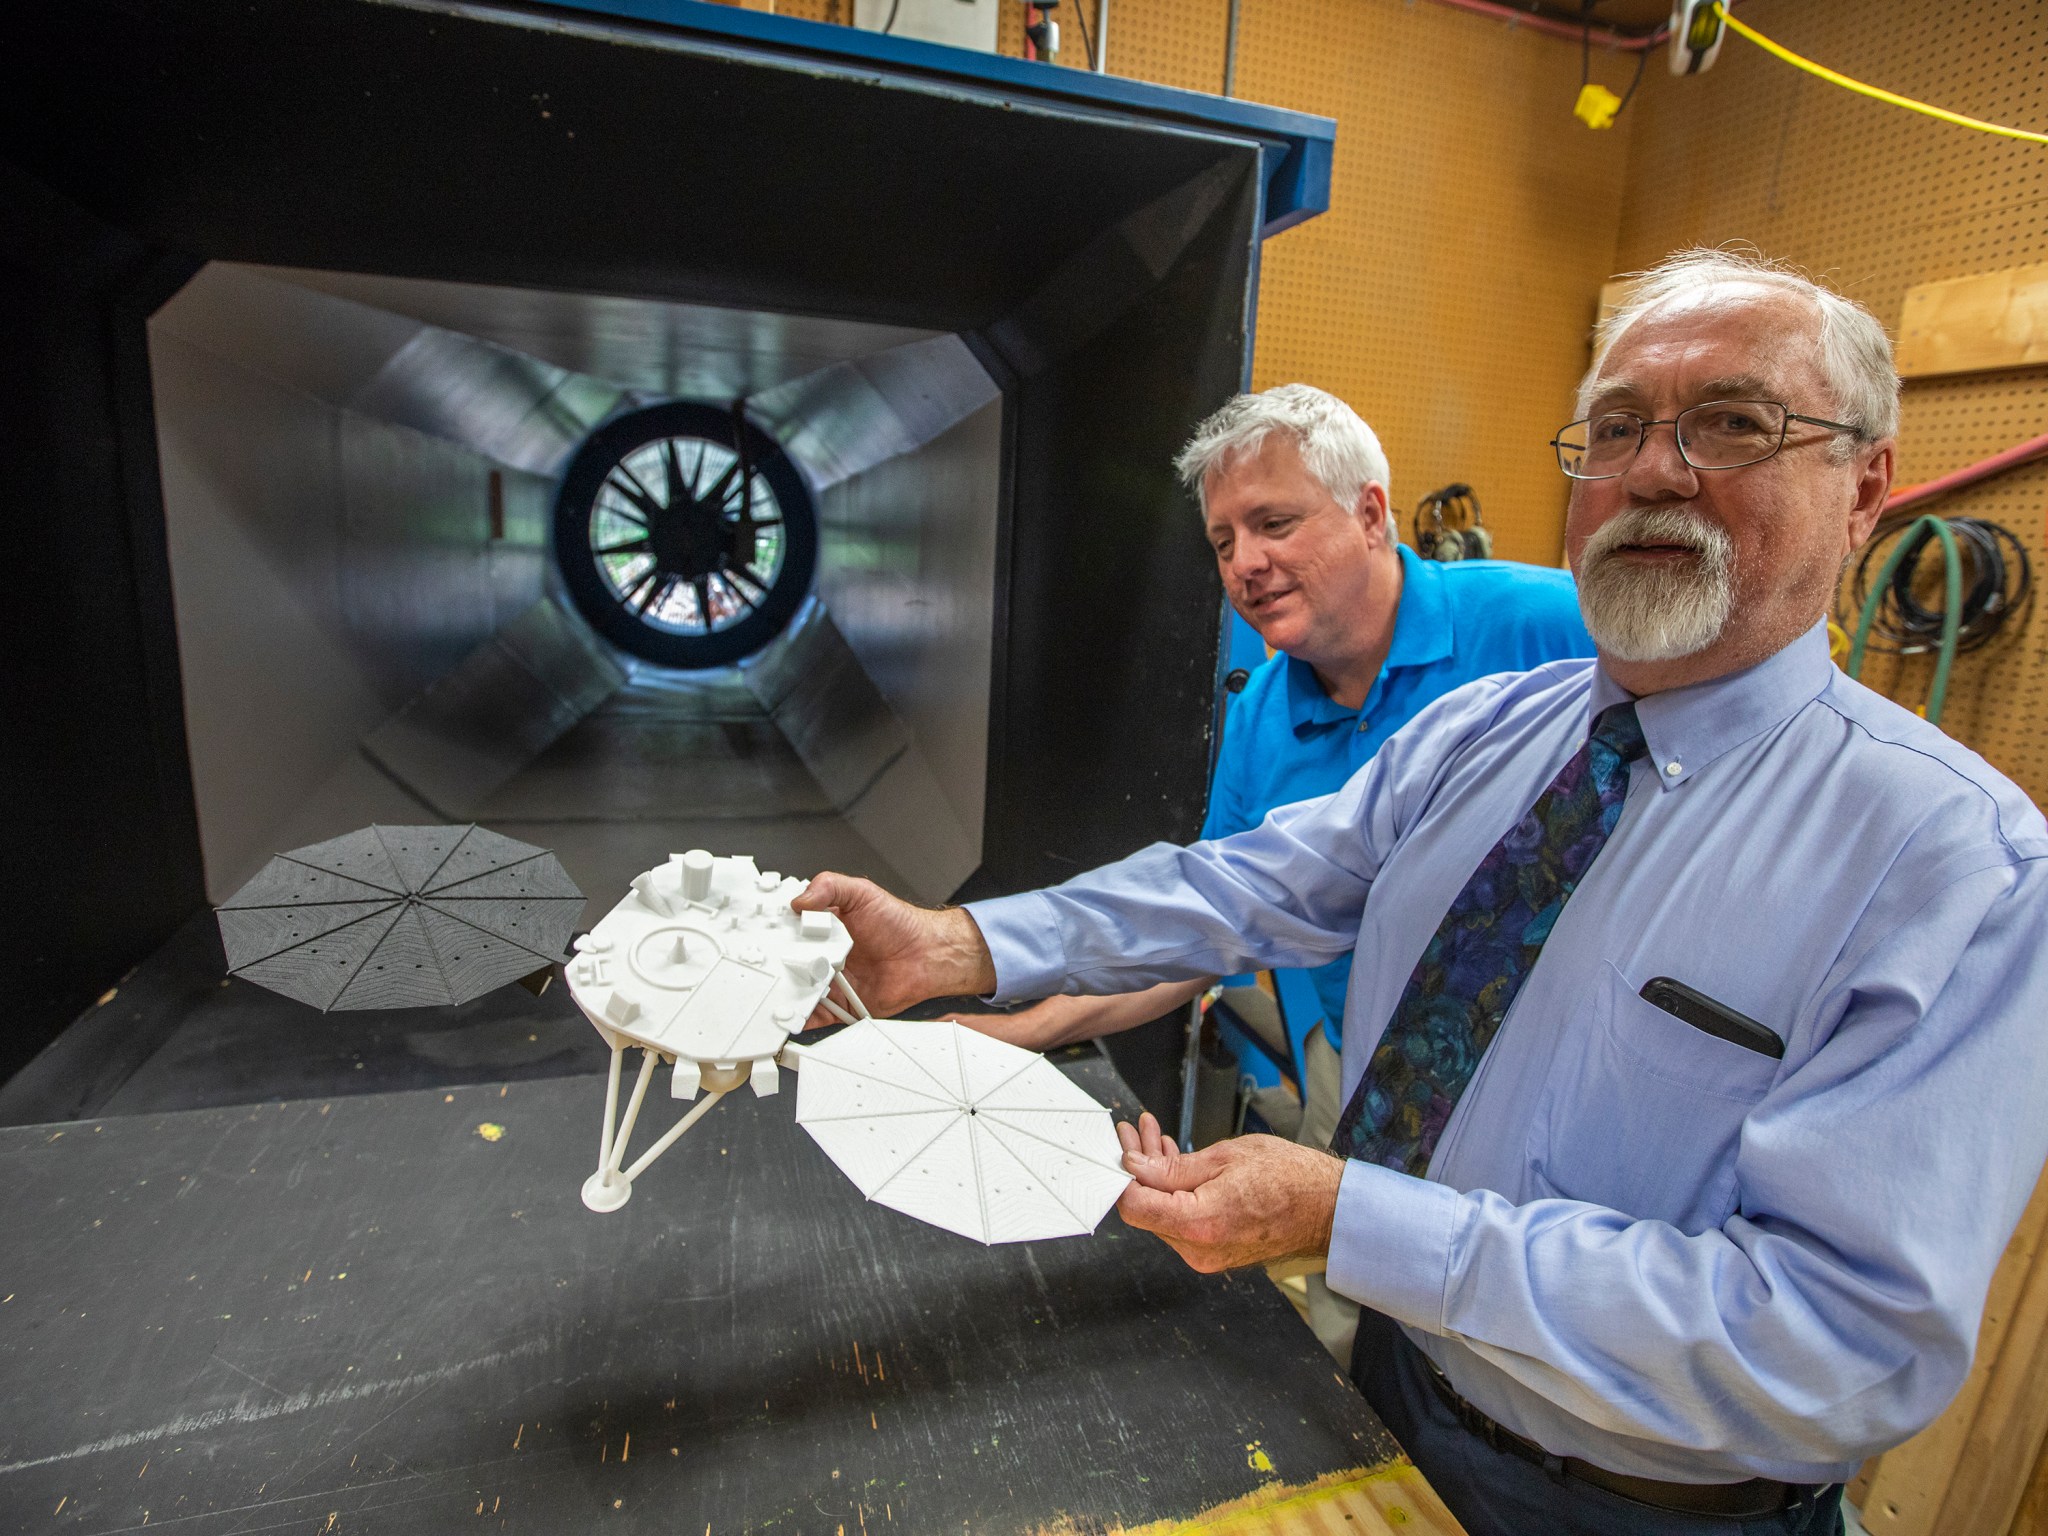 Richard White, right, shows off a model of the Mars InSight lander as Robert Betts, center, looks on.